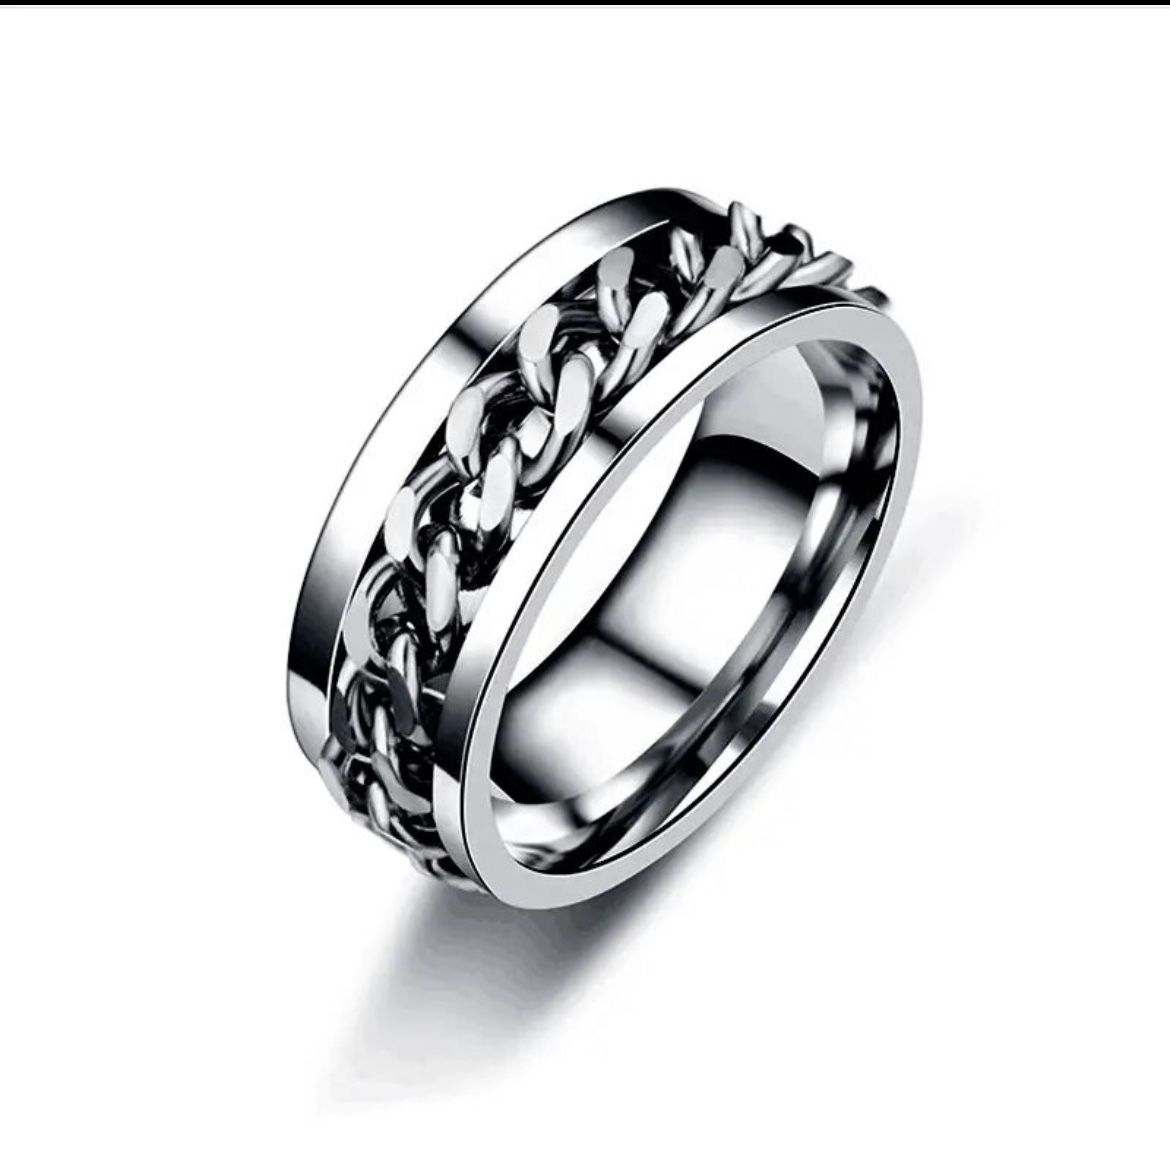 Stainless Steel Chain Rotating Ring For Men And Women